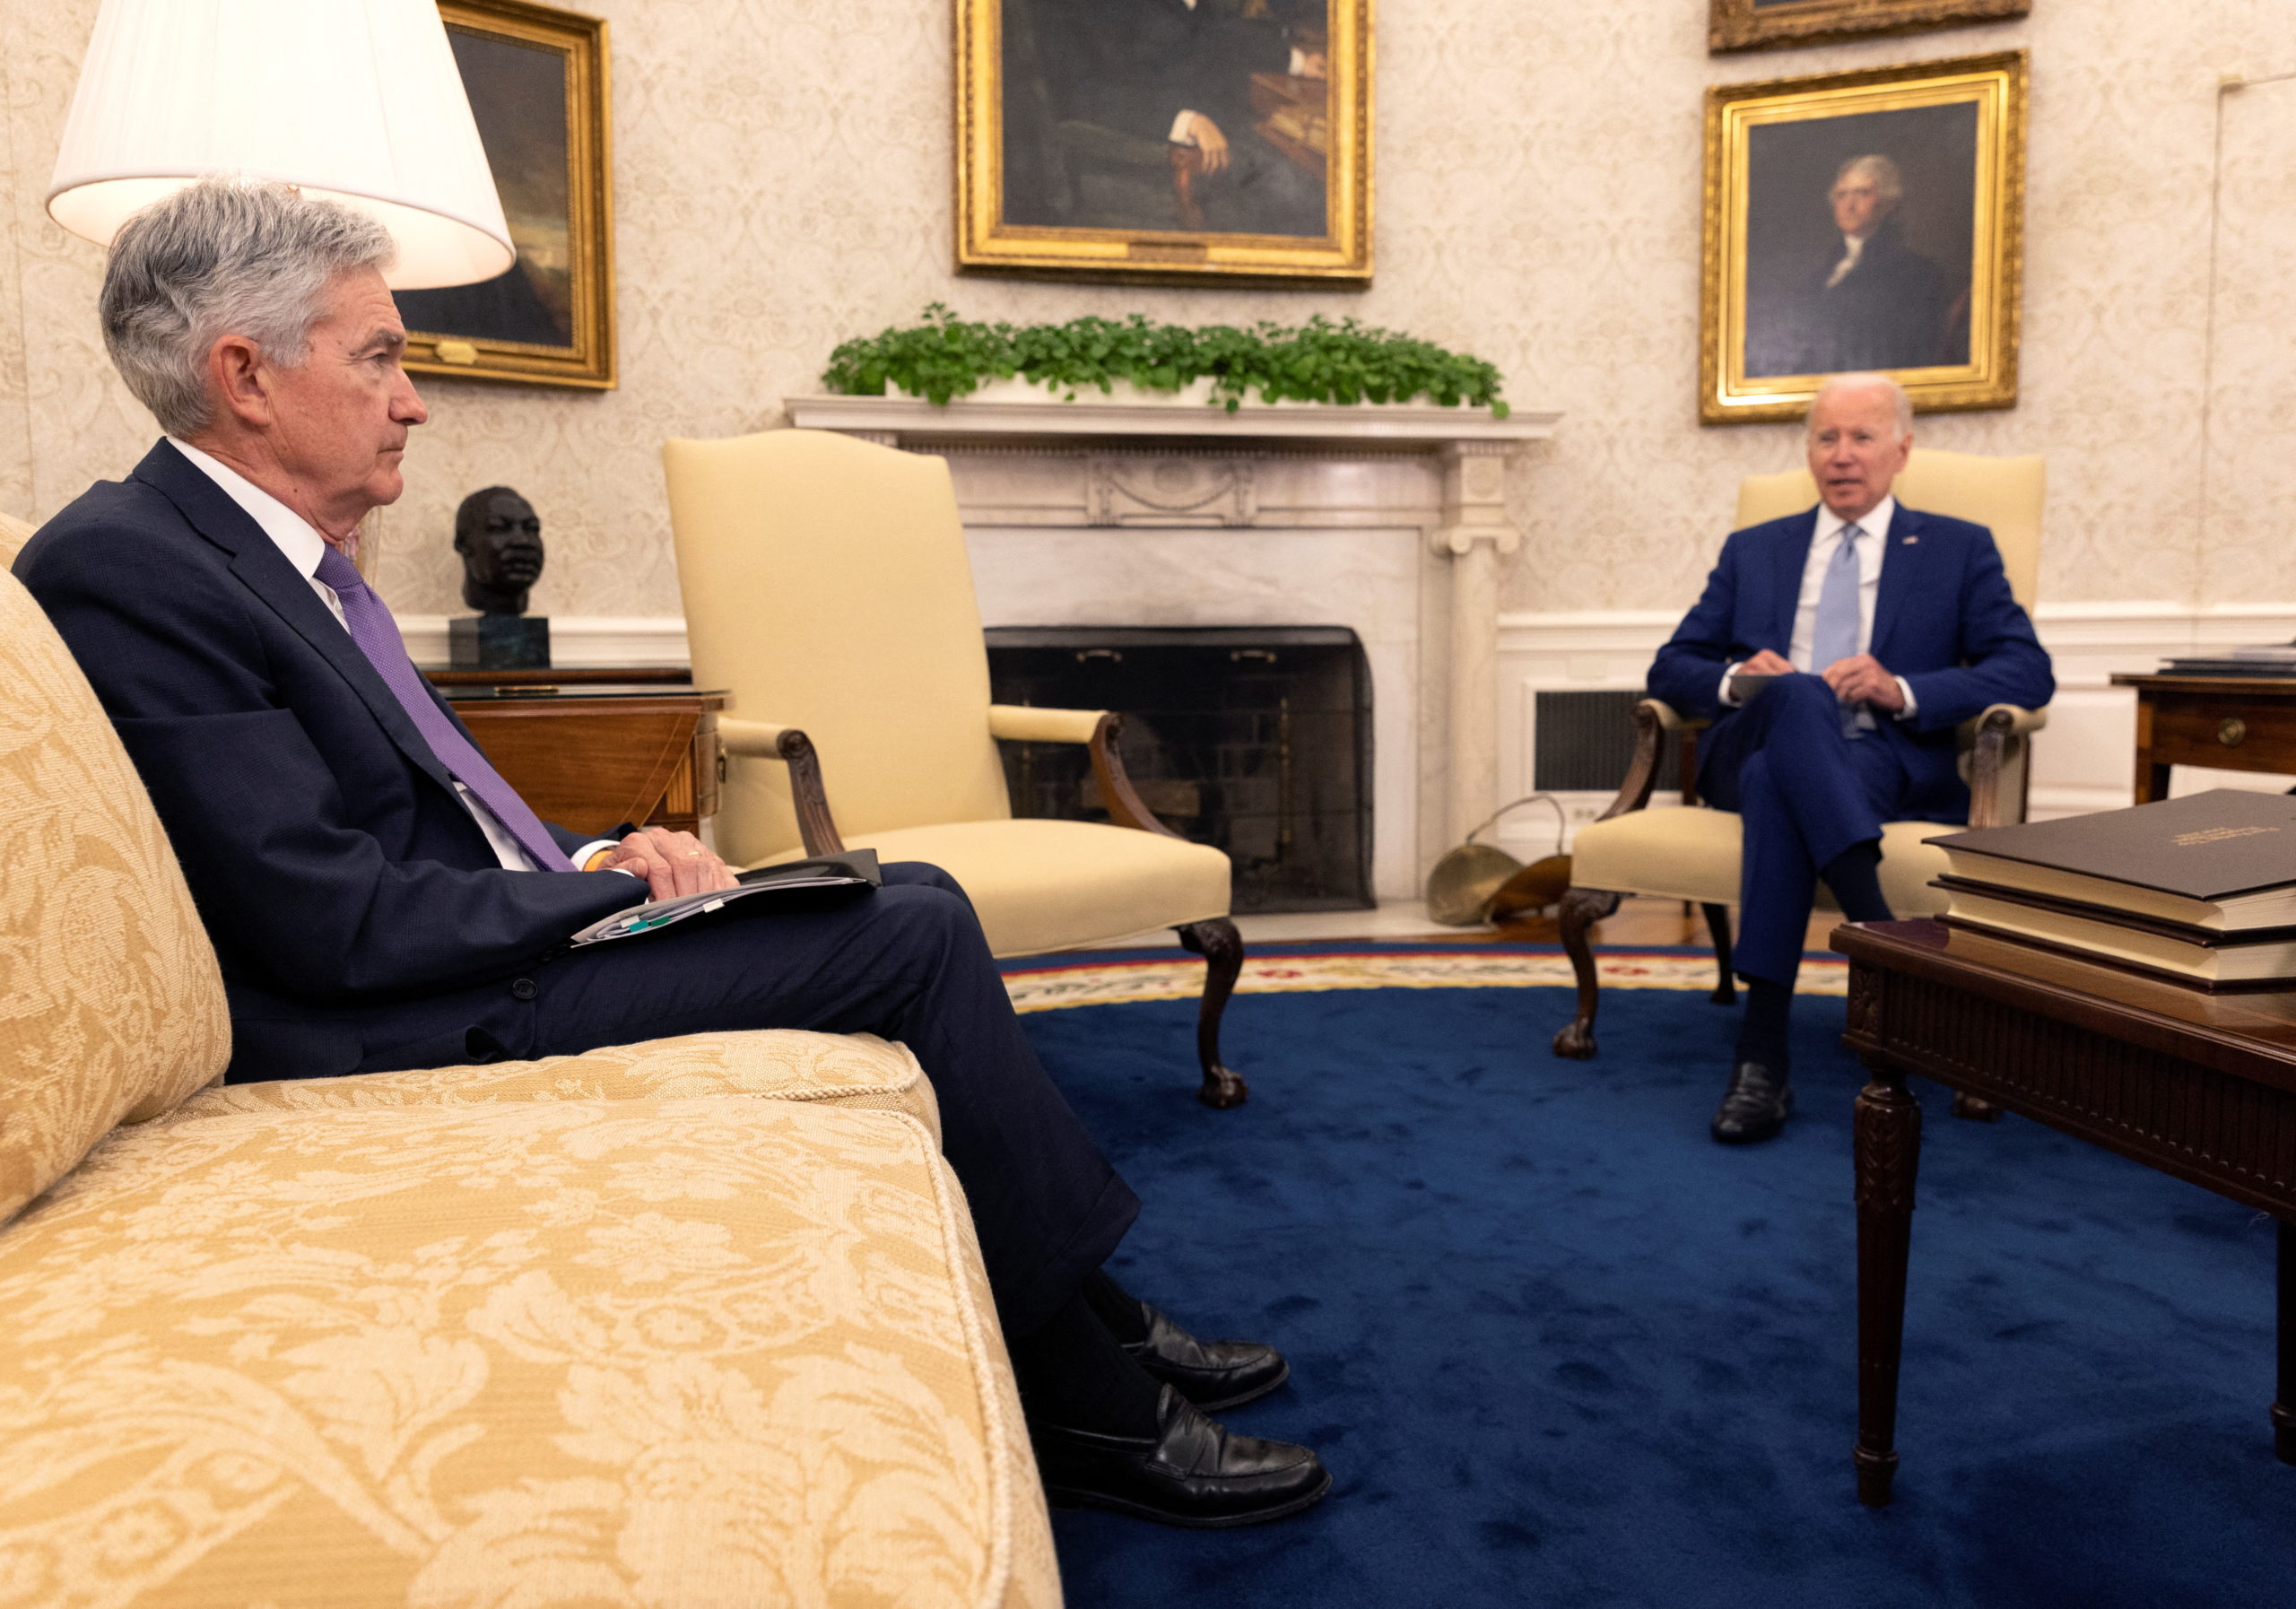 U.S. President Joe Biden meets with Federal Reserve Chair Jerome Powell and U.S. Treasury Secretary Janet Yellen to talk about the economy in the Oval Office at the White House in Washington, D.C., U.S., May 31, 2022. REUTERS/Leah Millis